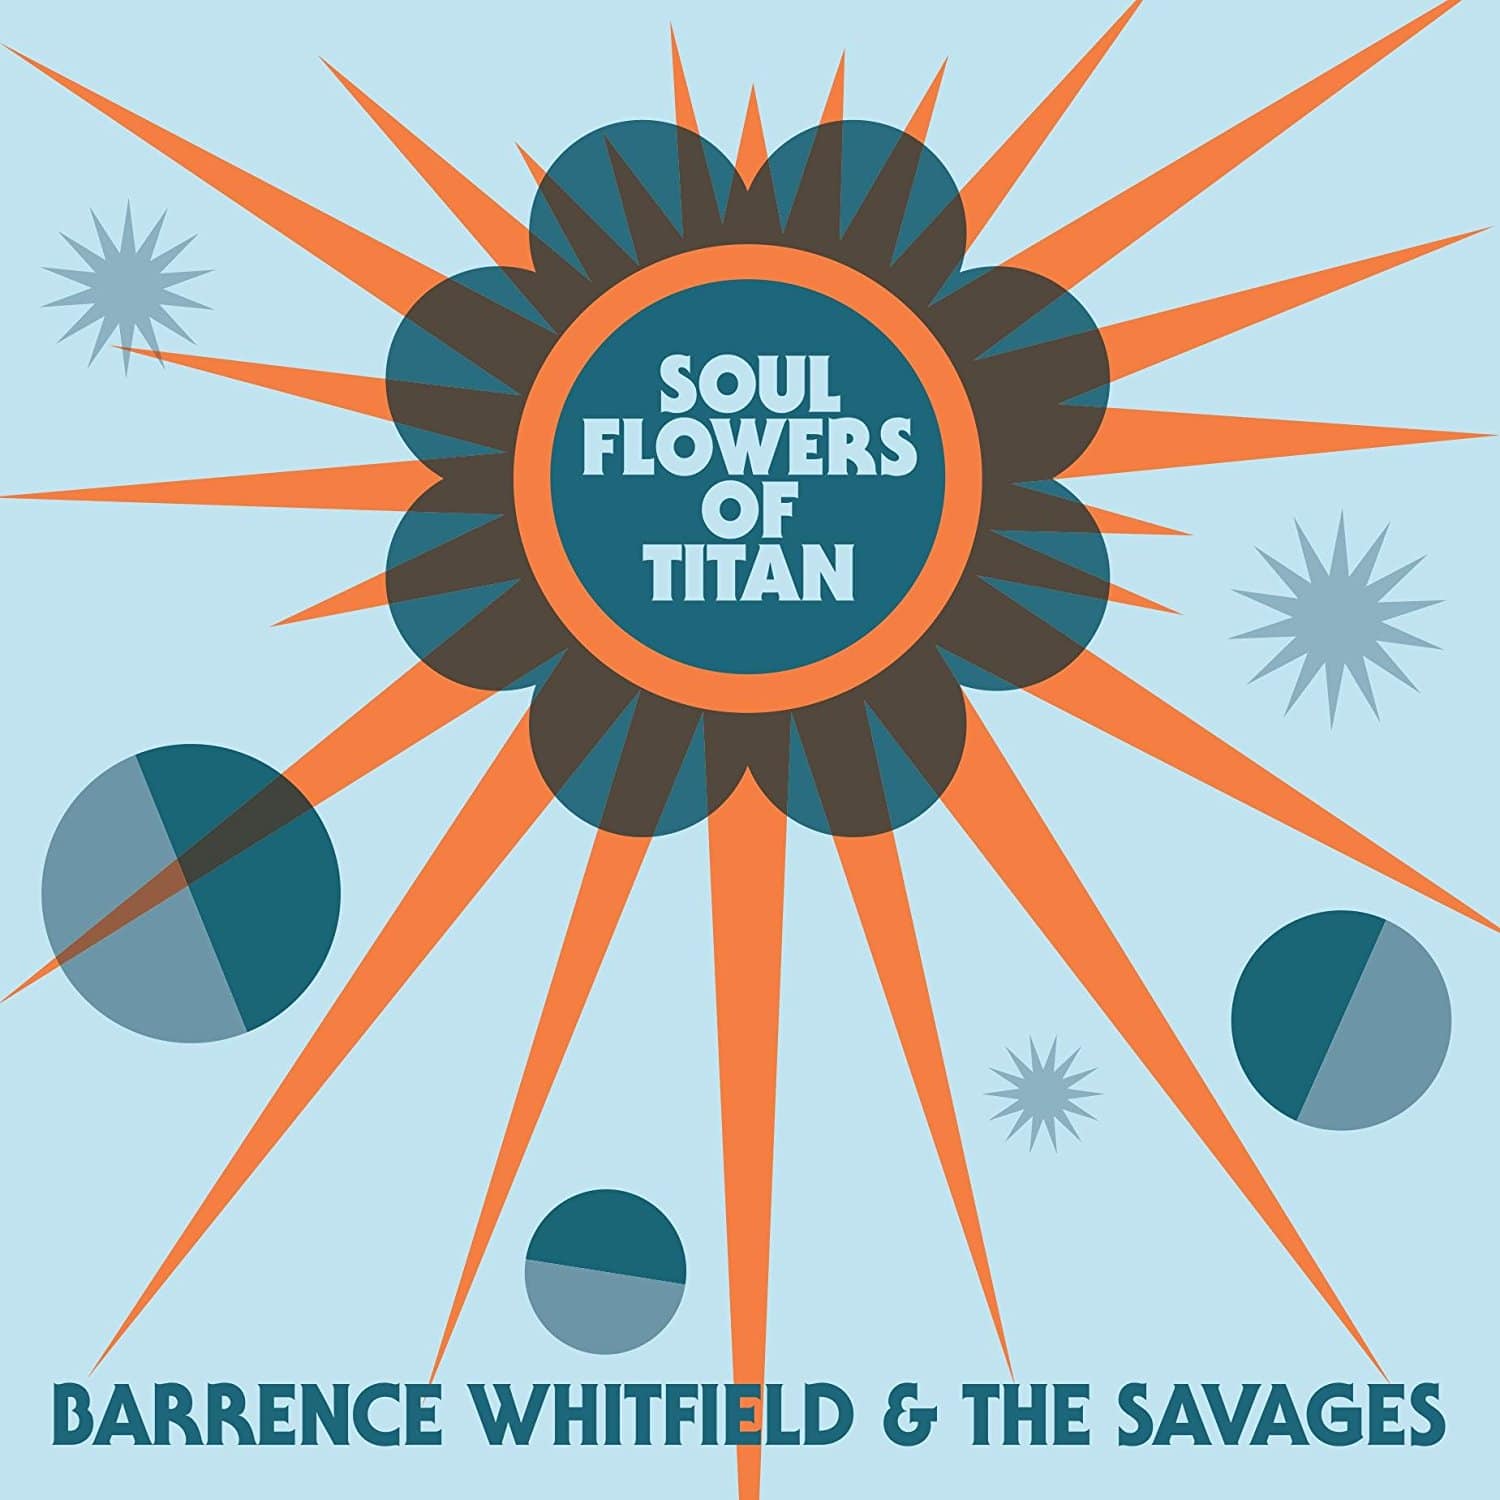 Barrence Whitfield & the Savages: Soul Flowers of Titan